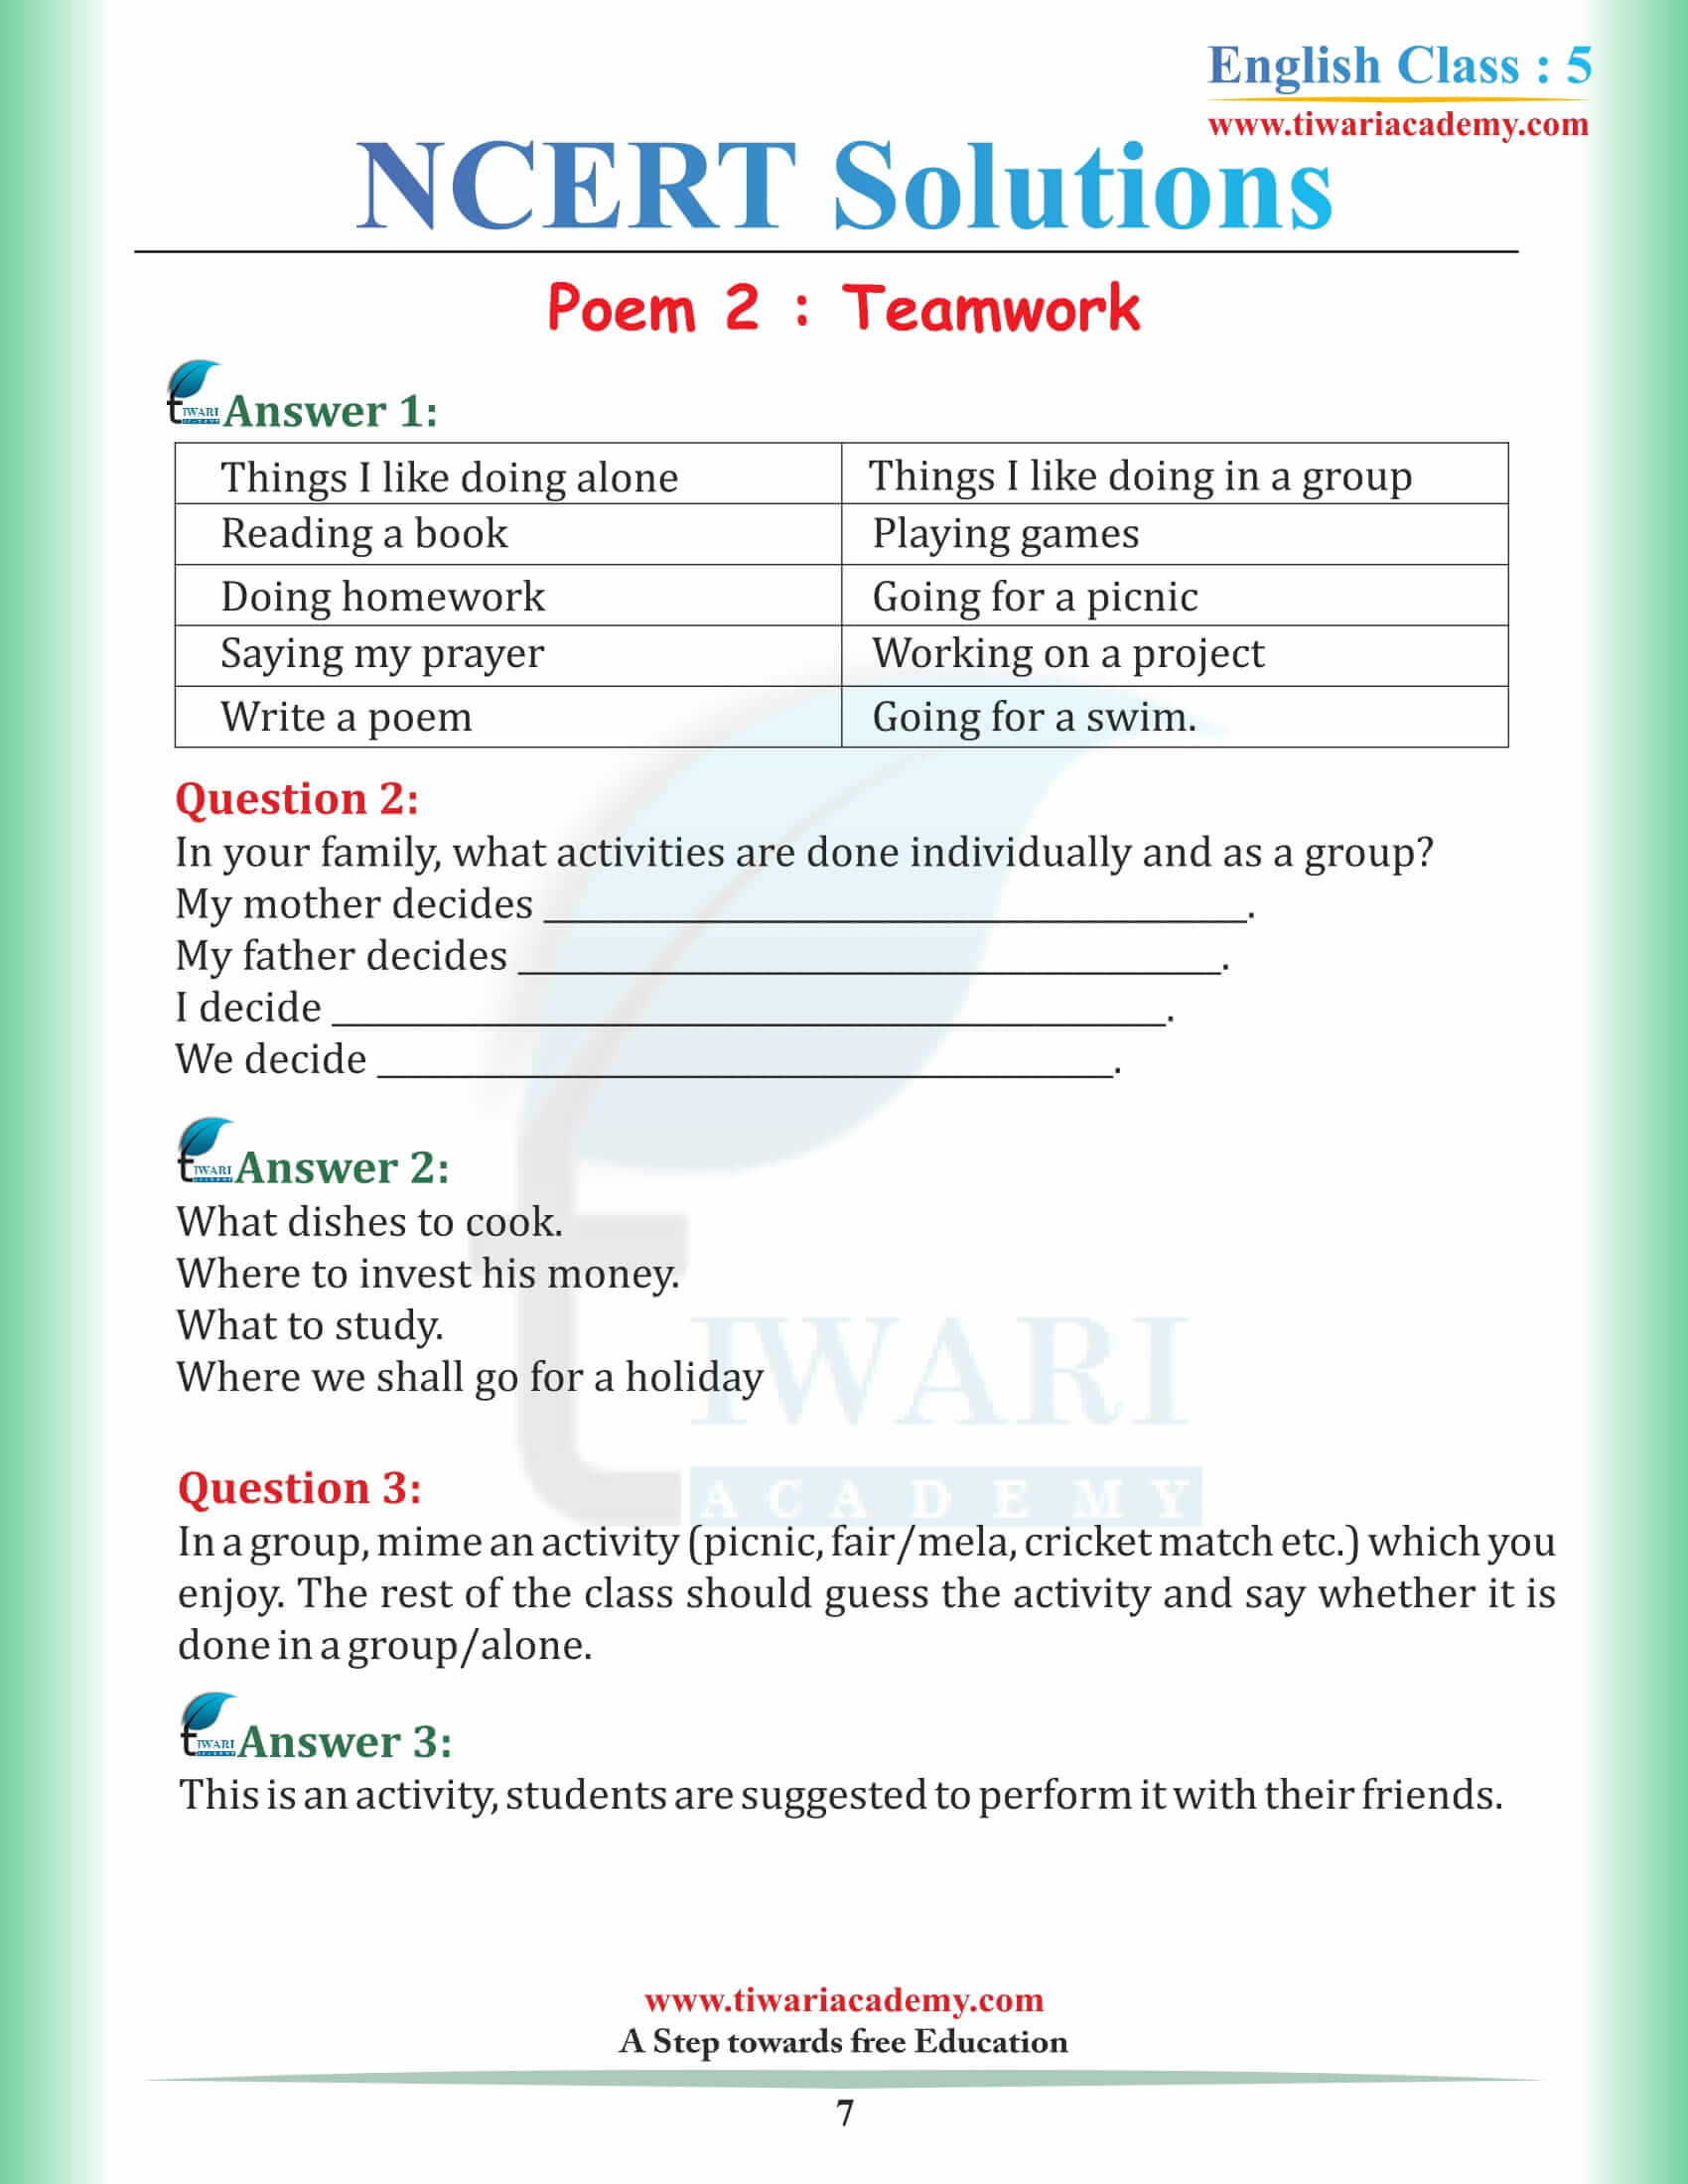 NCERT Solutions for Class 5 English Chapter 2 free download